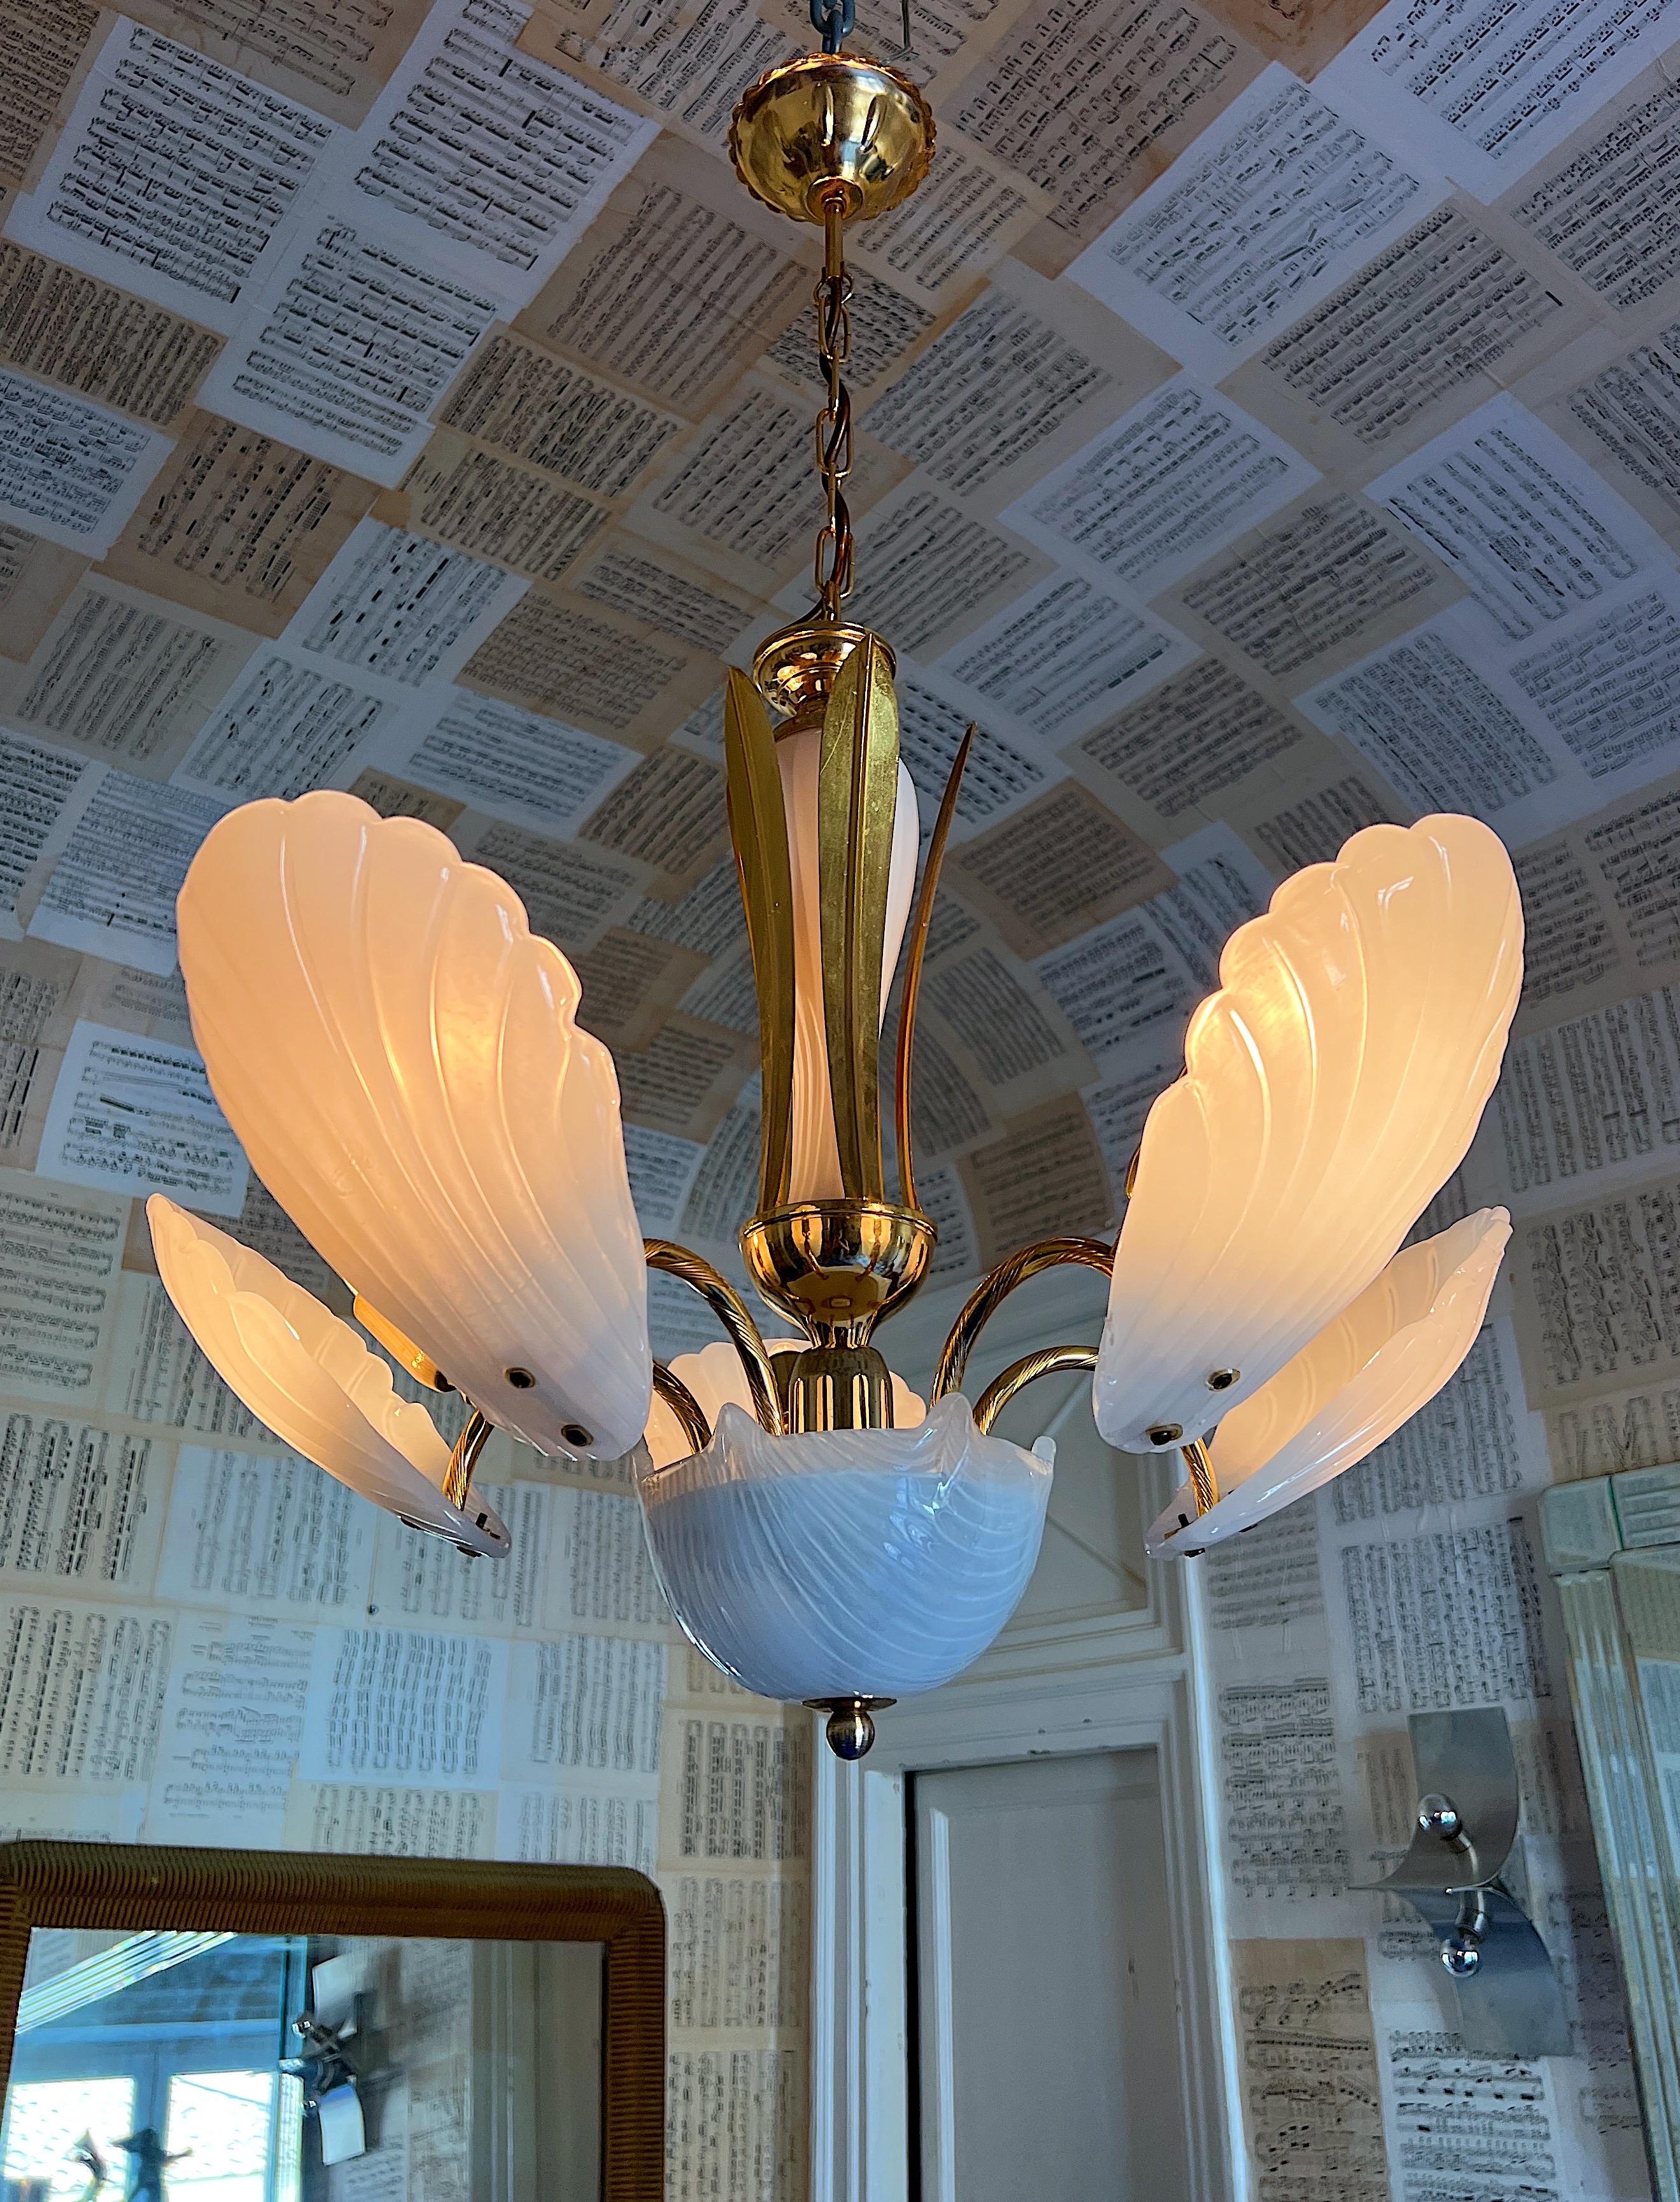 Timeless 1980s Murano Glass Chandelier. Its gold coated structure gracefully supports five arms adorned with magnificent Murano glass shell leaves, creating an exquisite interplay of light and artistry. This chandelier offers an elegant lighting